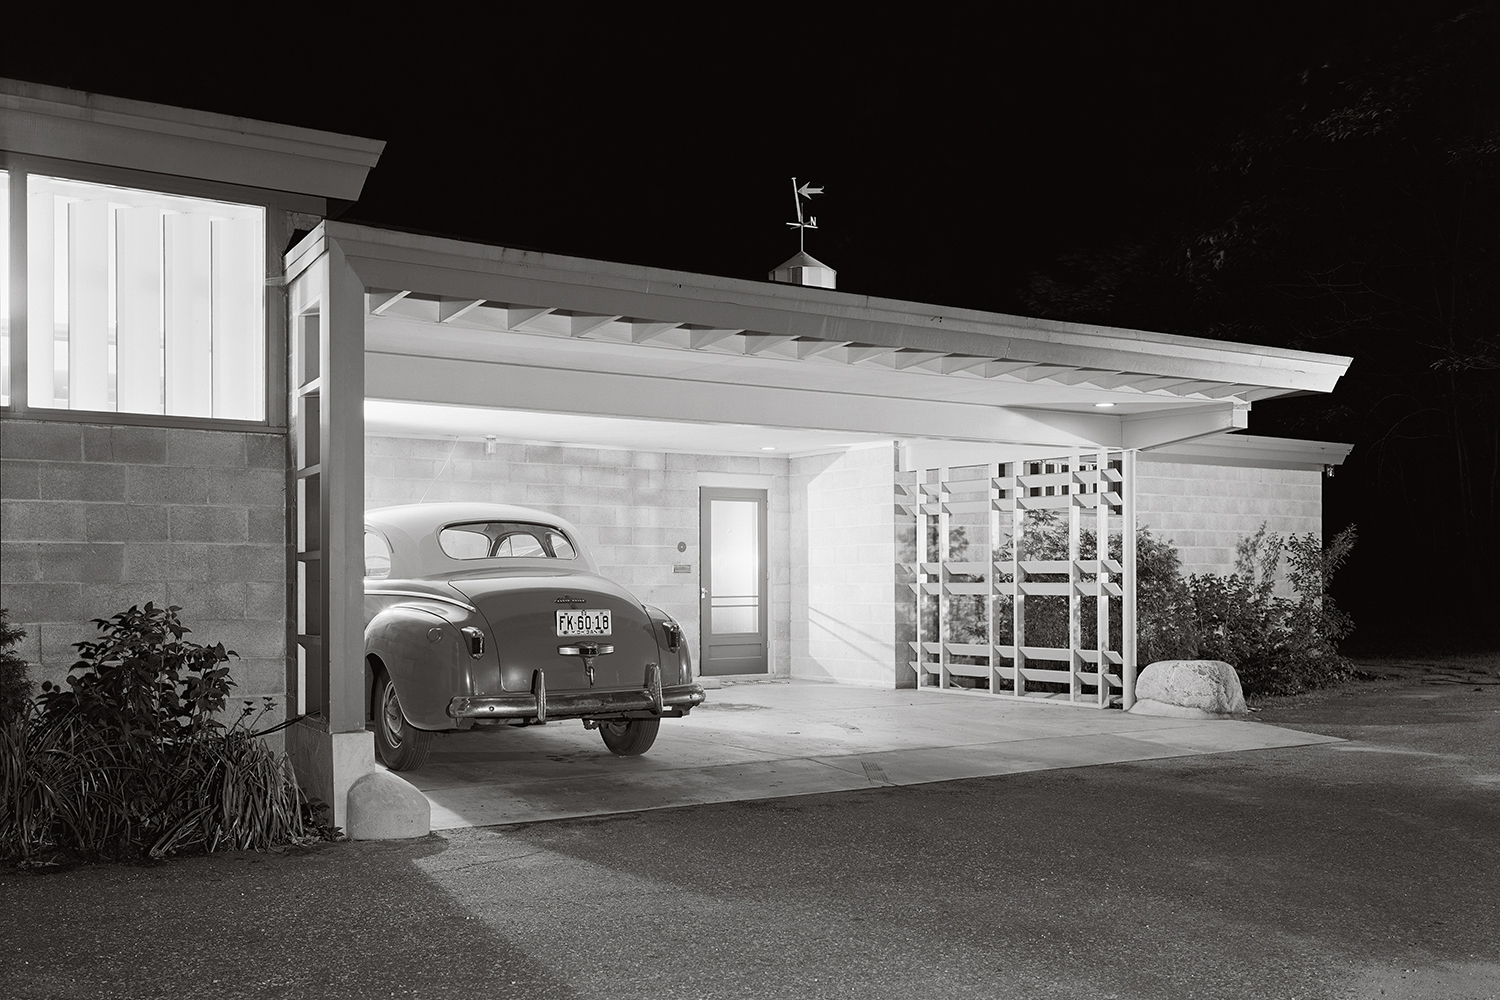 The Dream of Midcentury Modern in Black and White Photos – Aperture Foundation NY